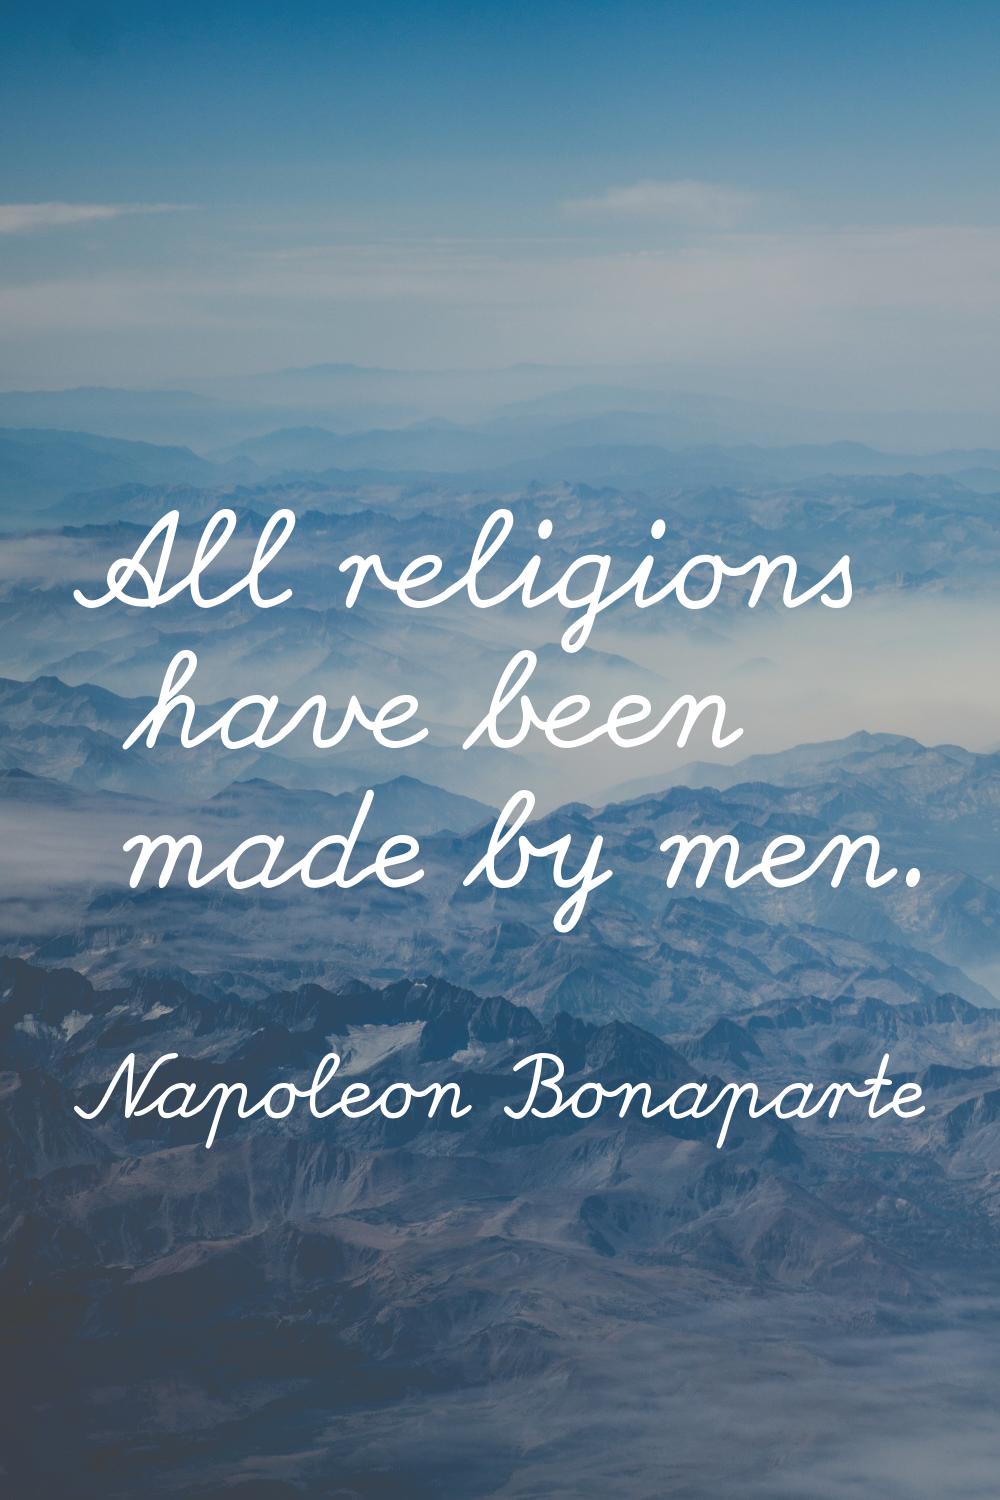 All religions have been made by men.